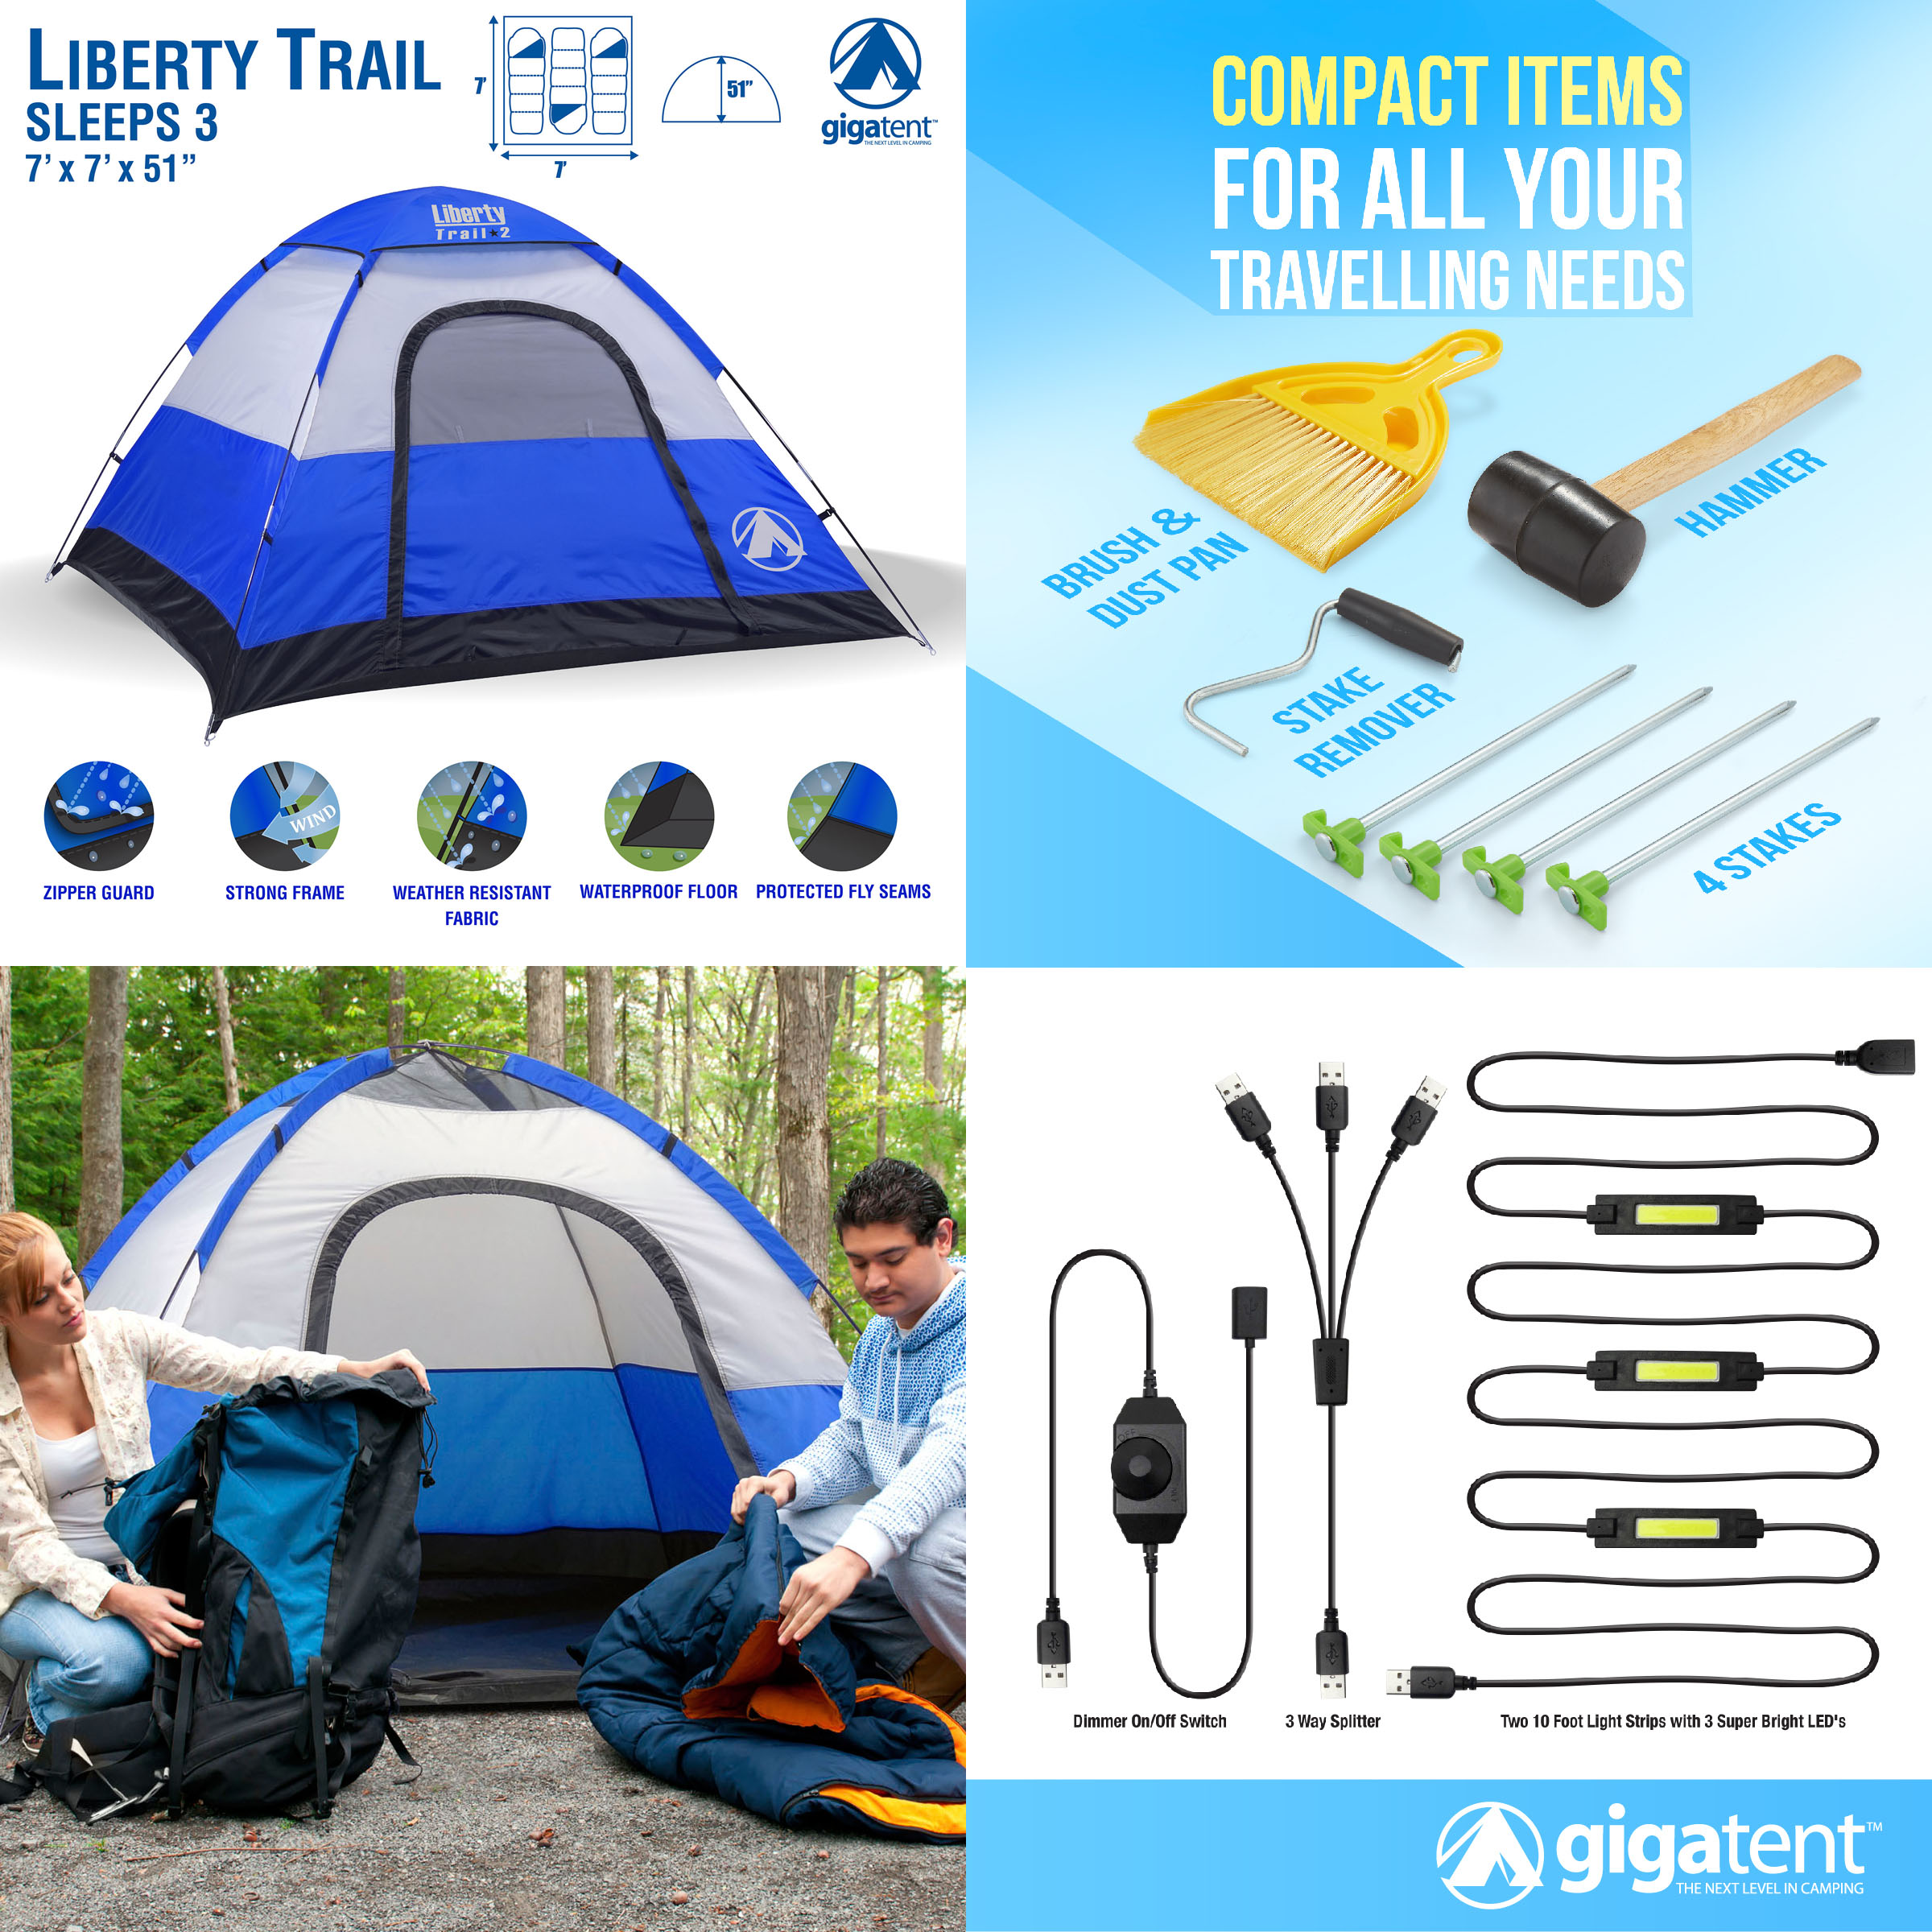 GigaTent 4-Person Dome Tent - image 4 of 7